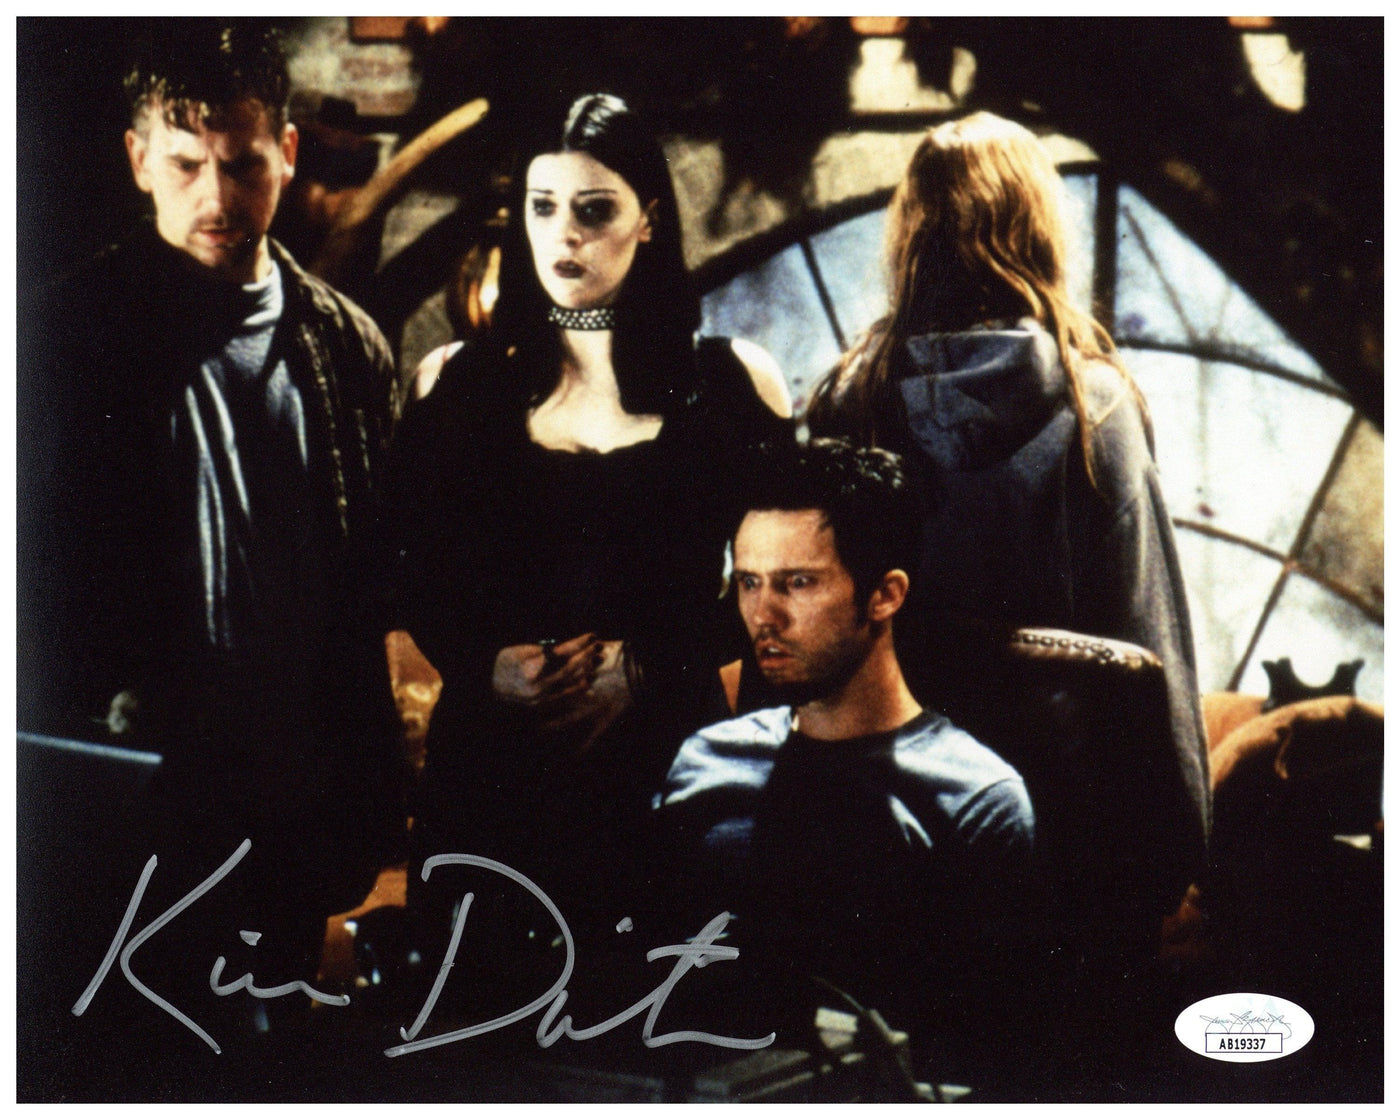 Kim Director Signed 8x10 Photo The Blair Witch Project Autographed JSA COA